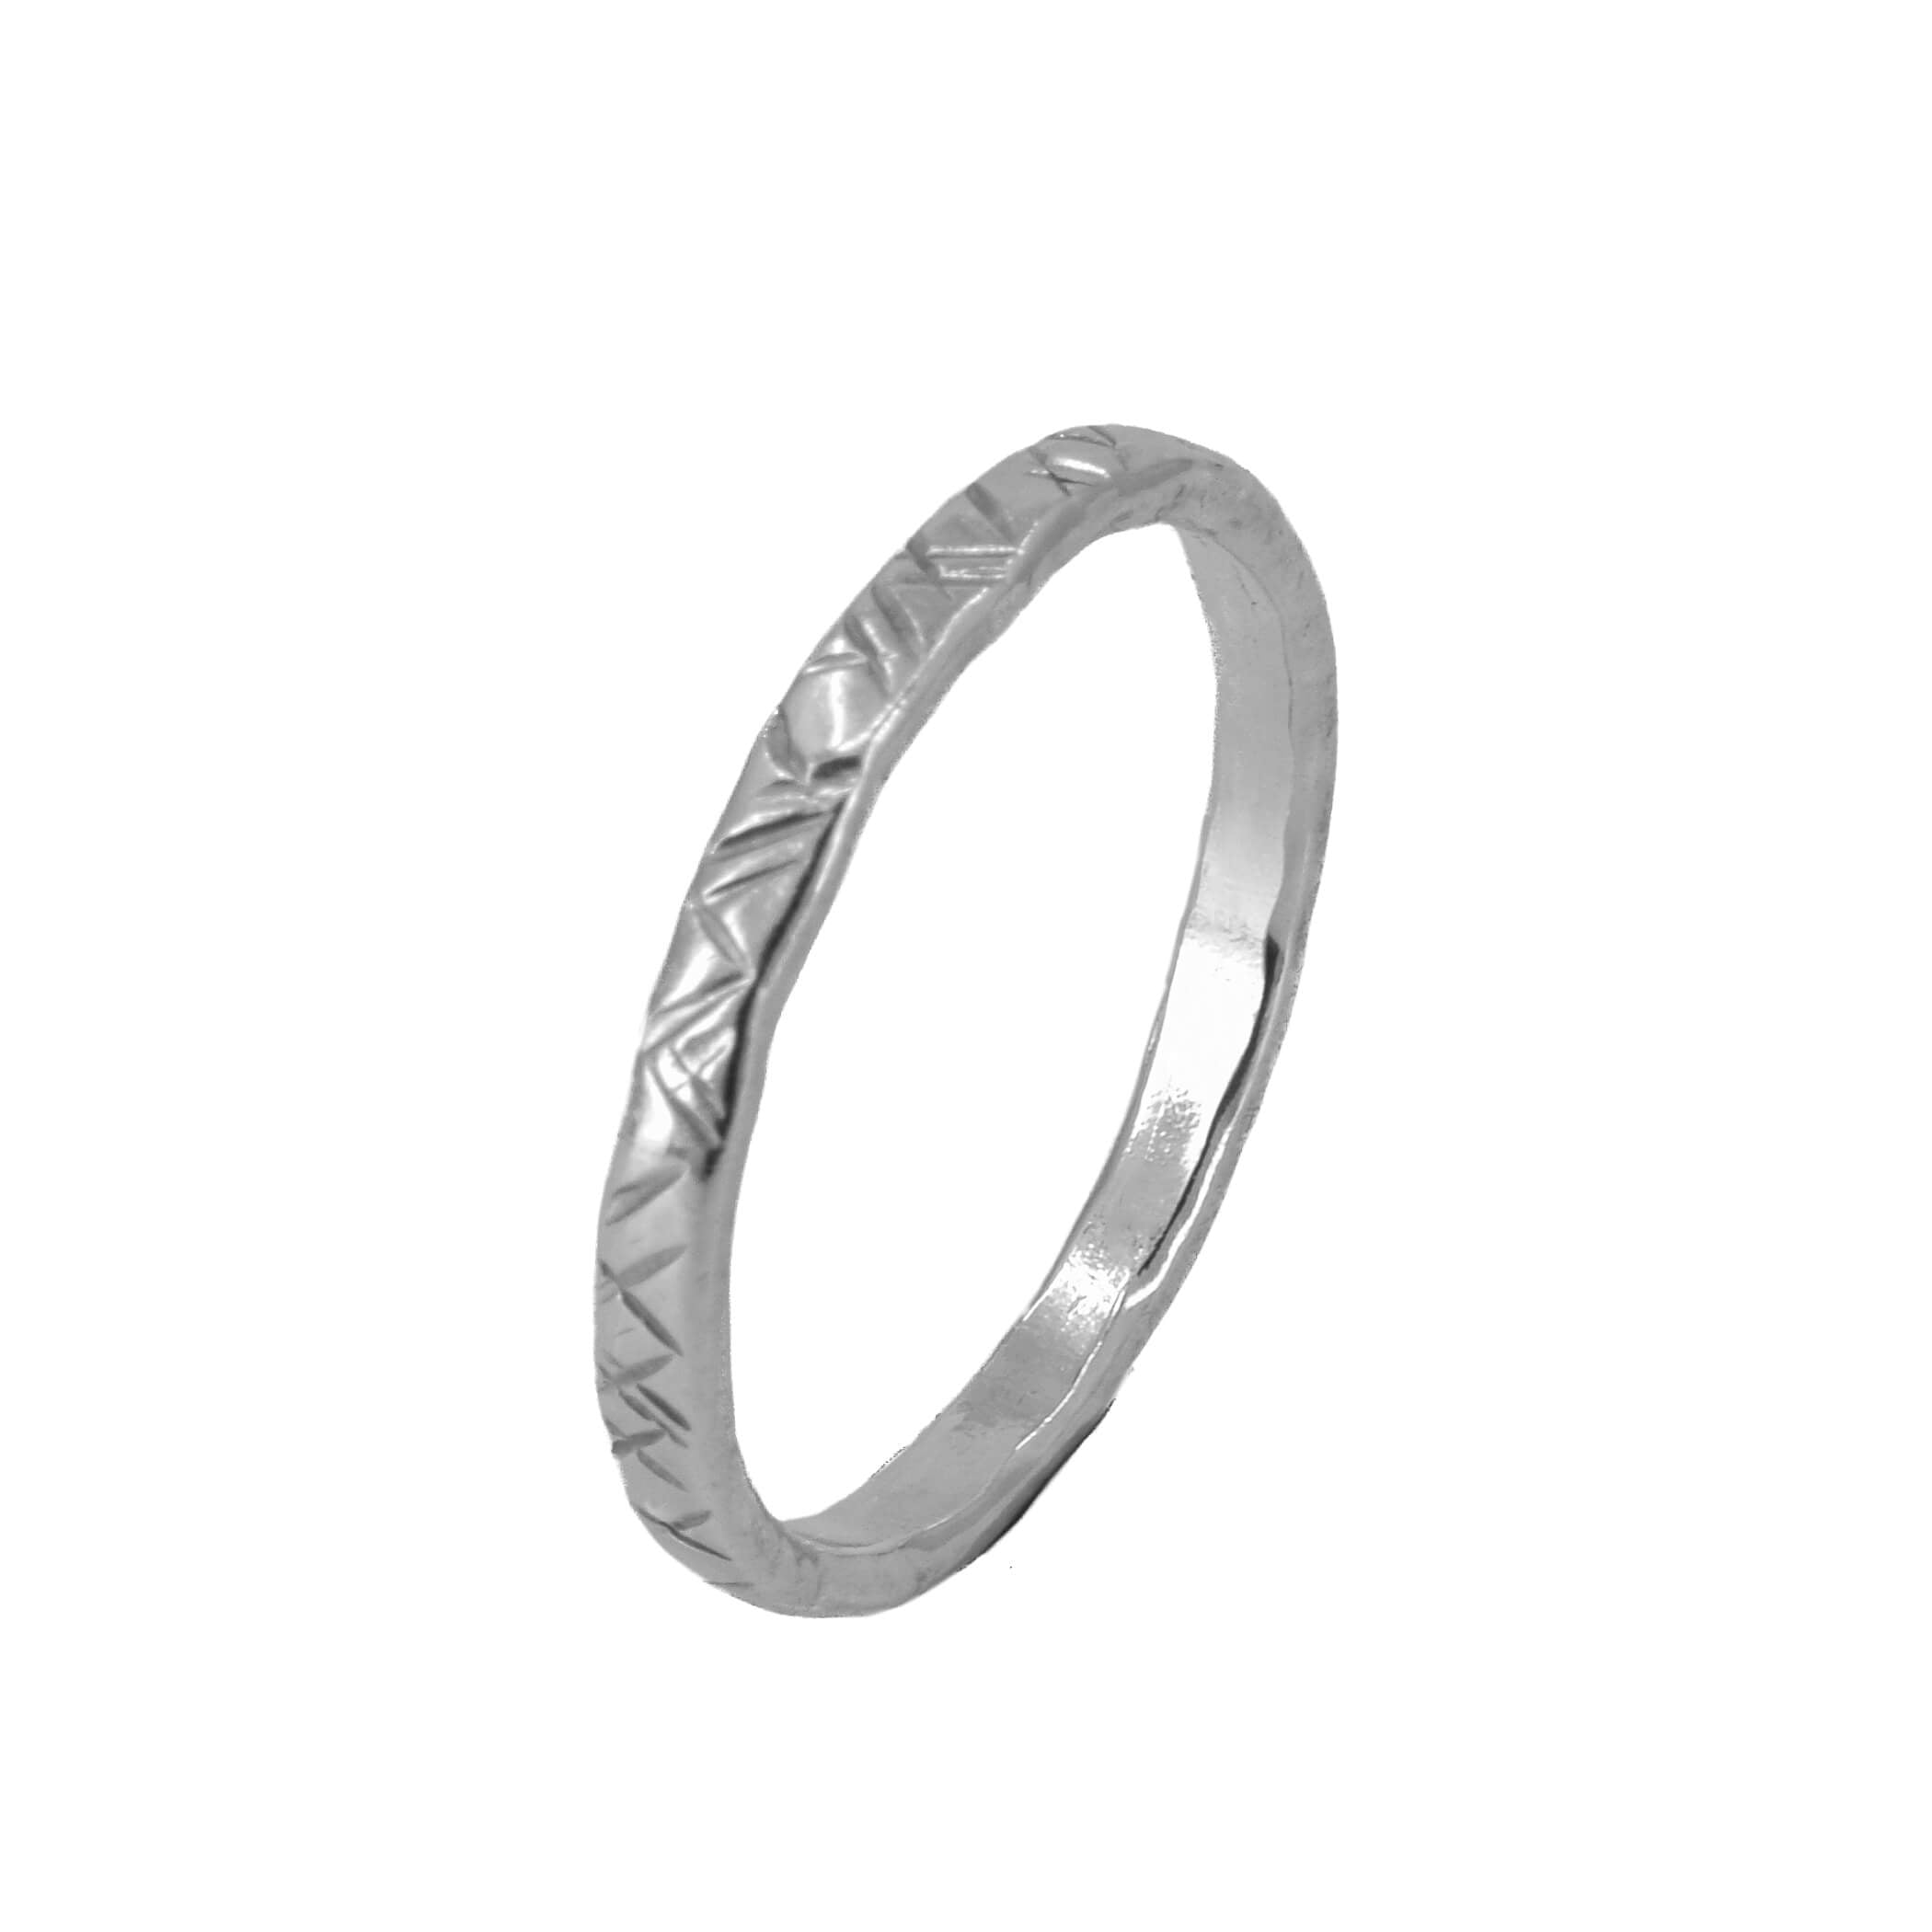 Criss cross textured ring sterling silver